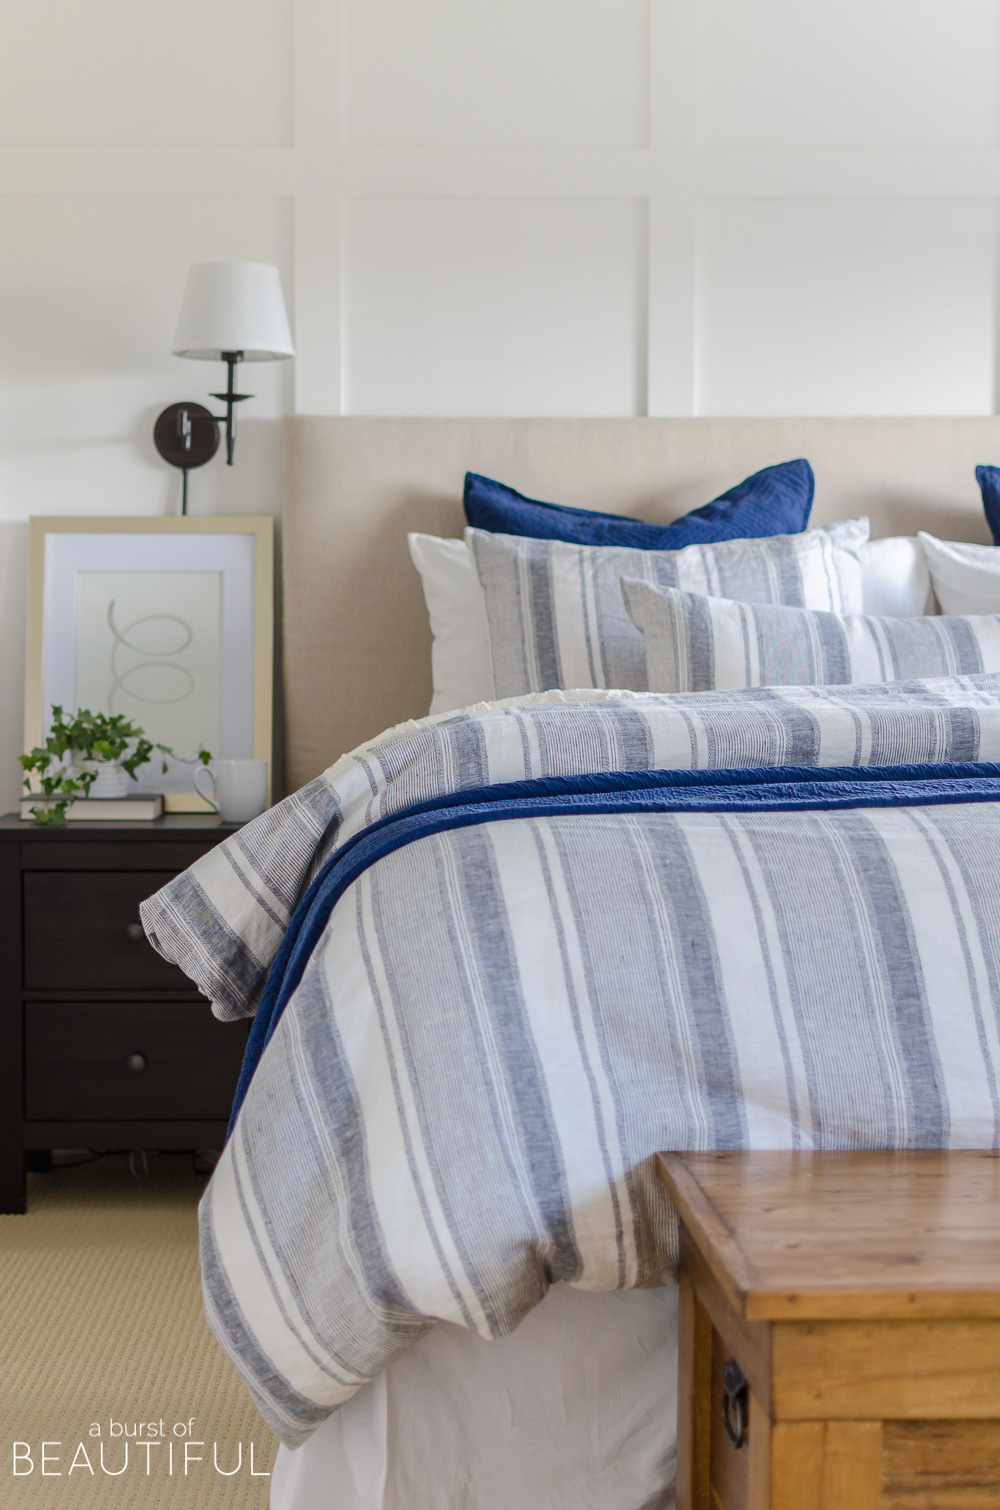 Create a cozy and inviting bedroom with these simple steps